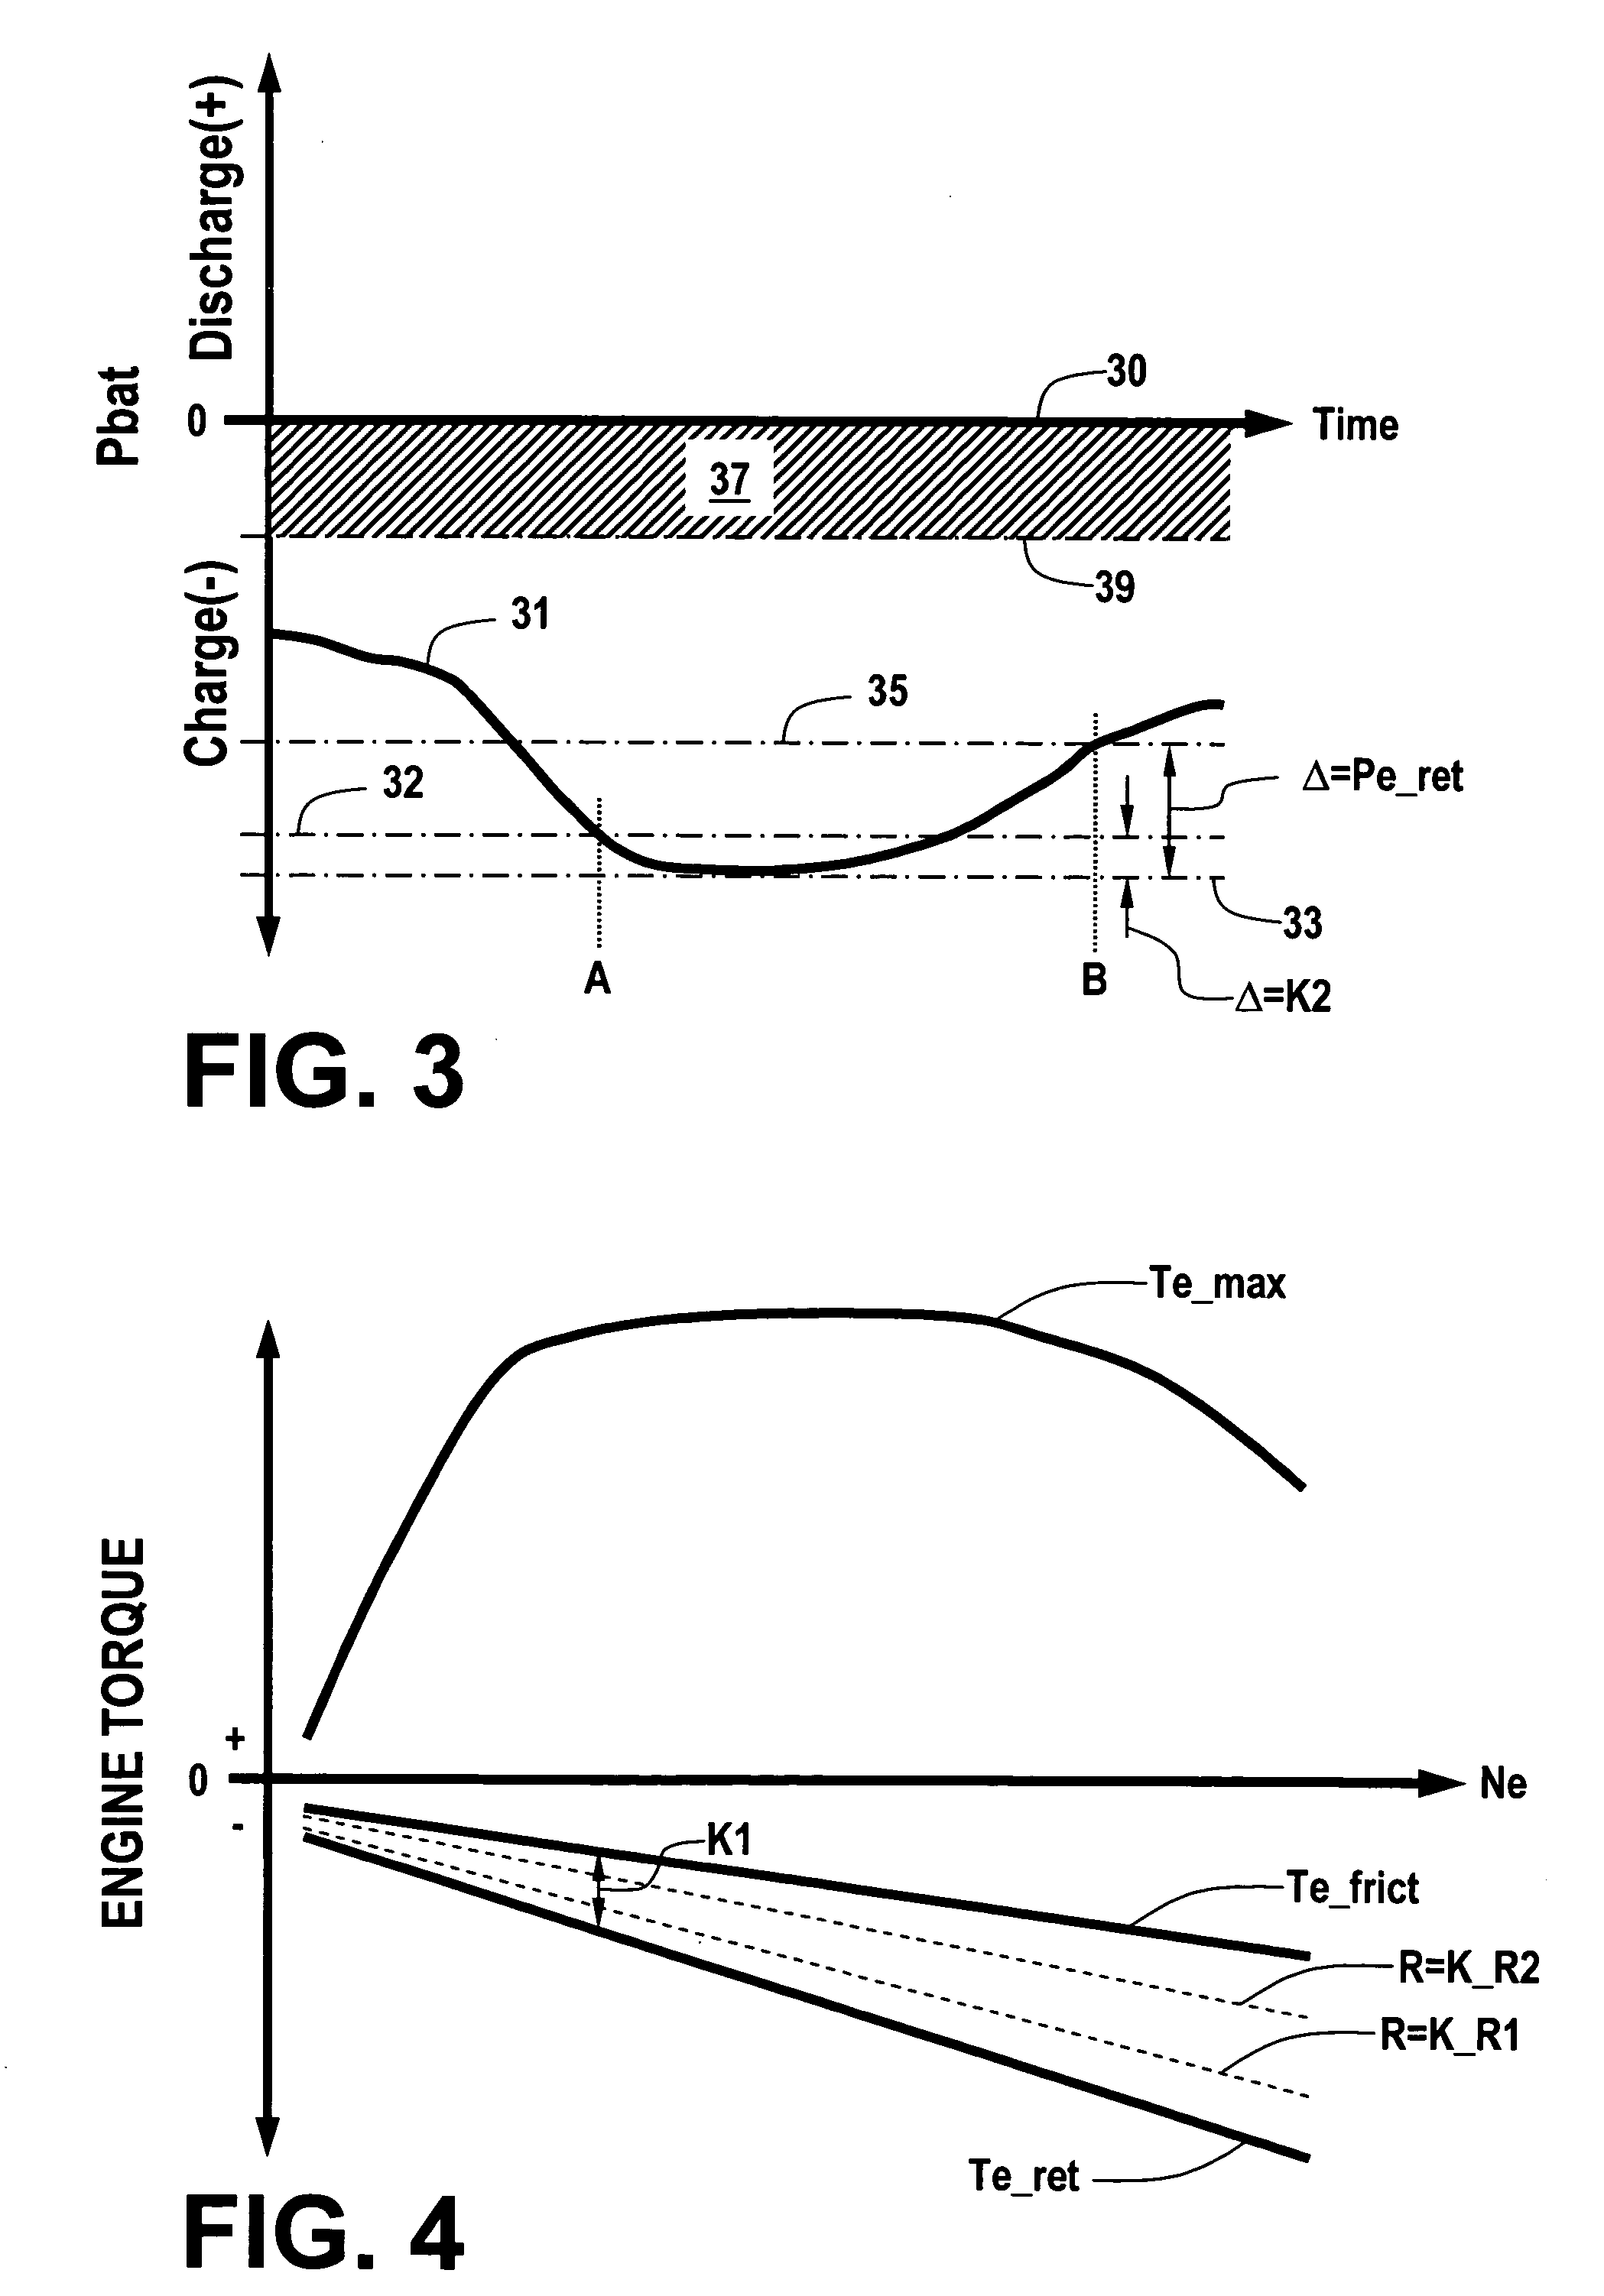 Engine retard operation scheduling and management in a hybrid vehicle